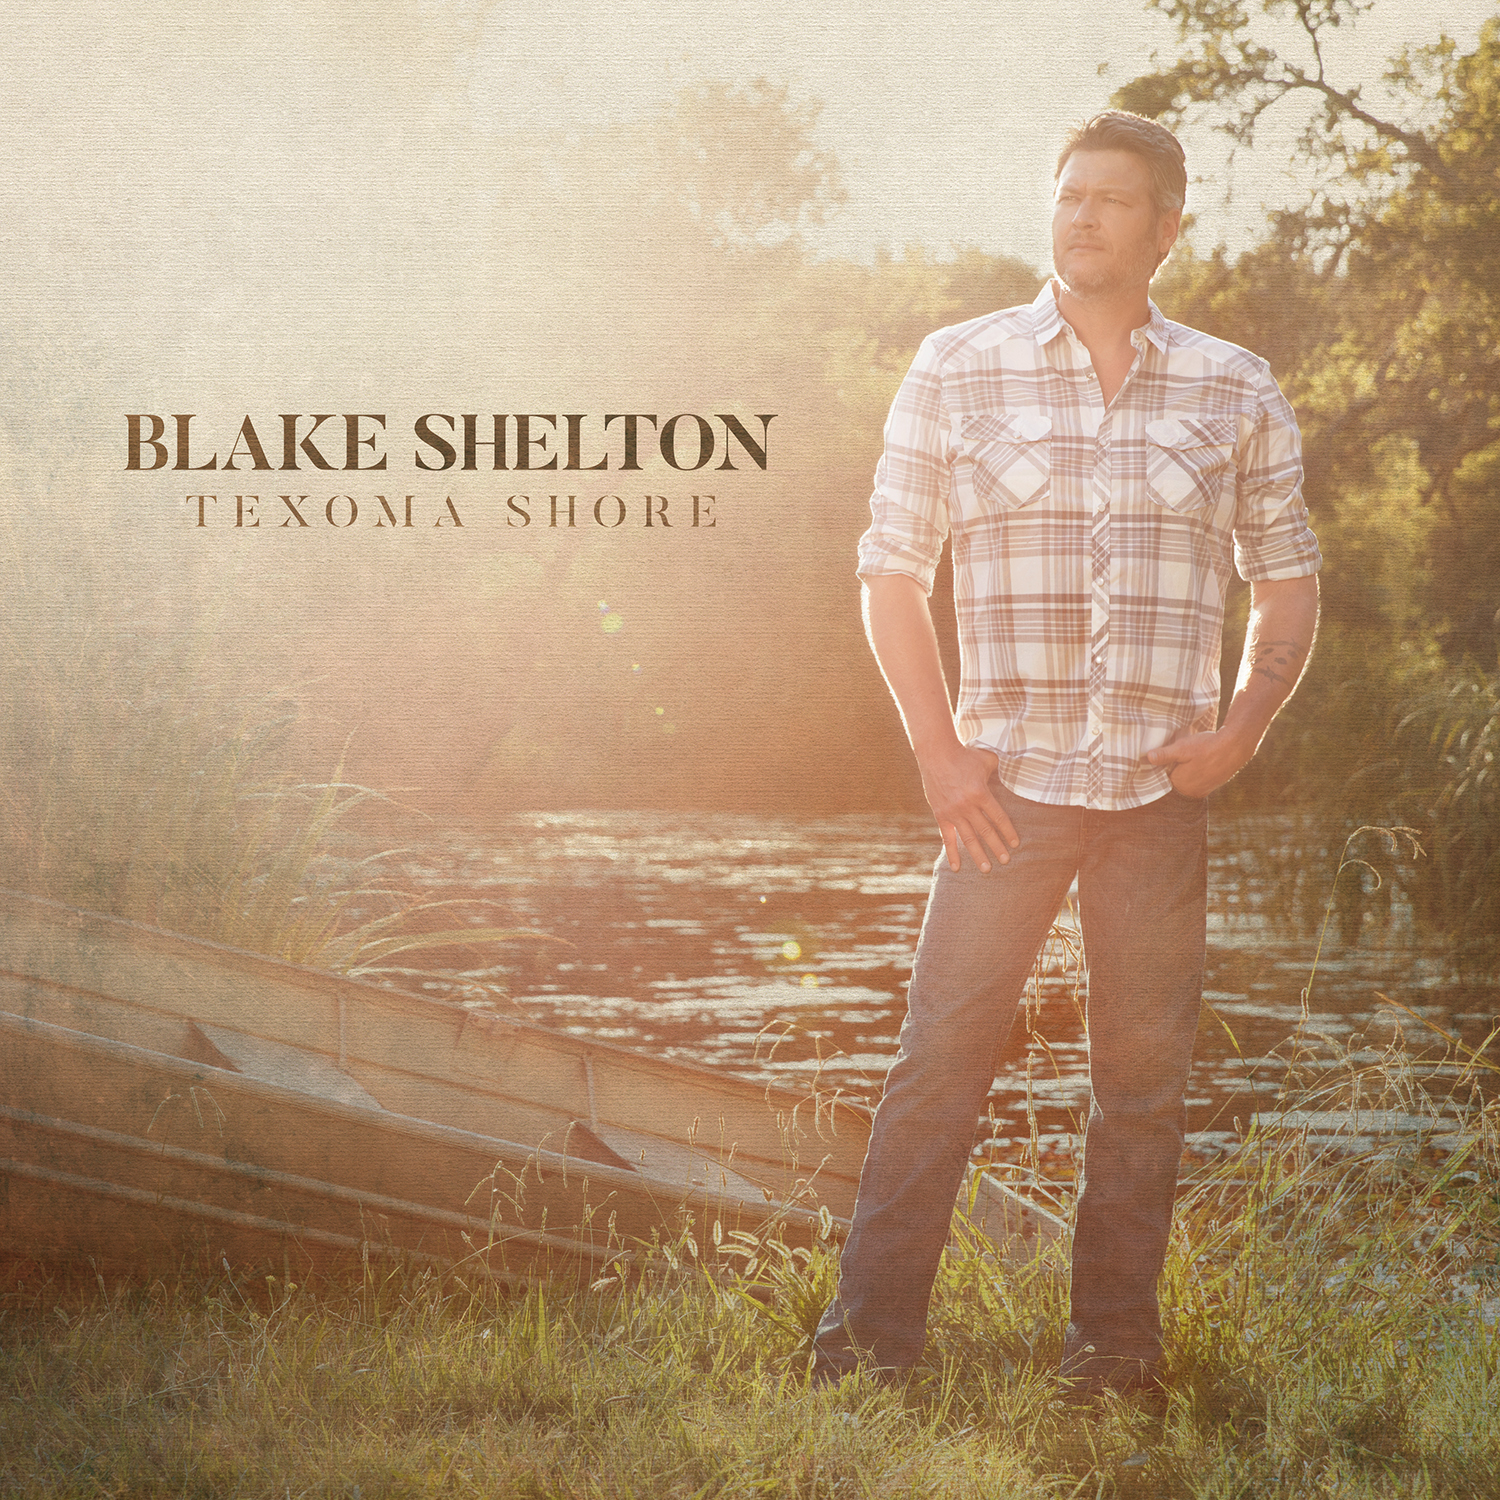 Blake Shelton Rides “The Wave” With Top Slot on Itunes Country Albums and Singles Charts